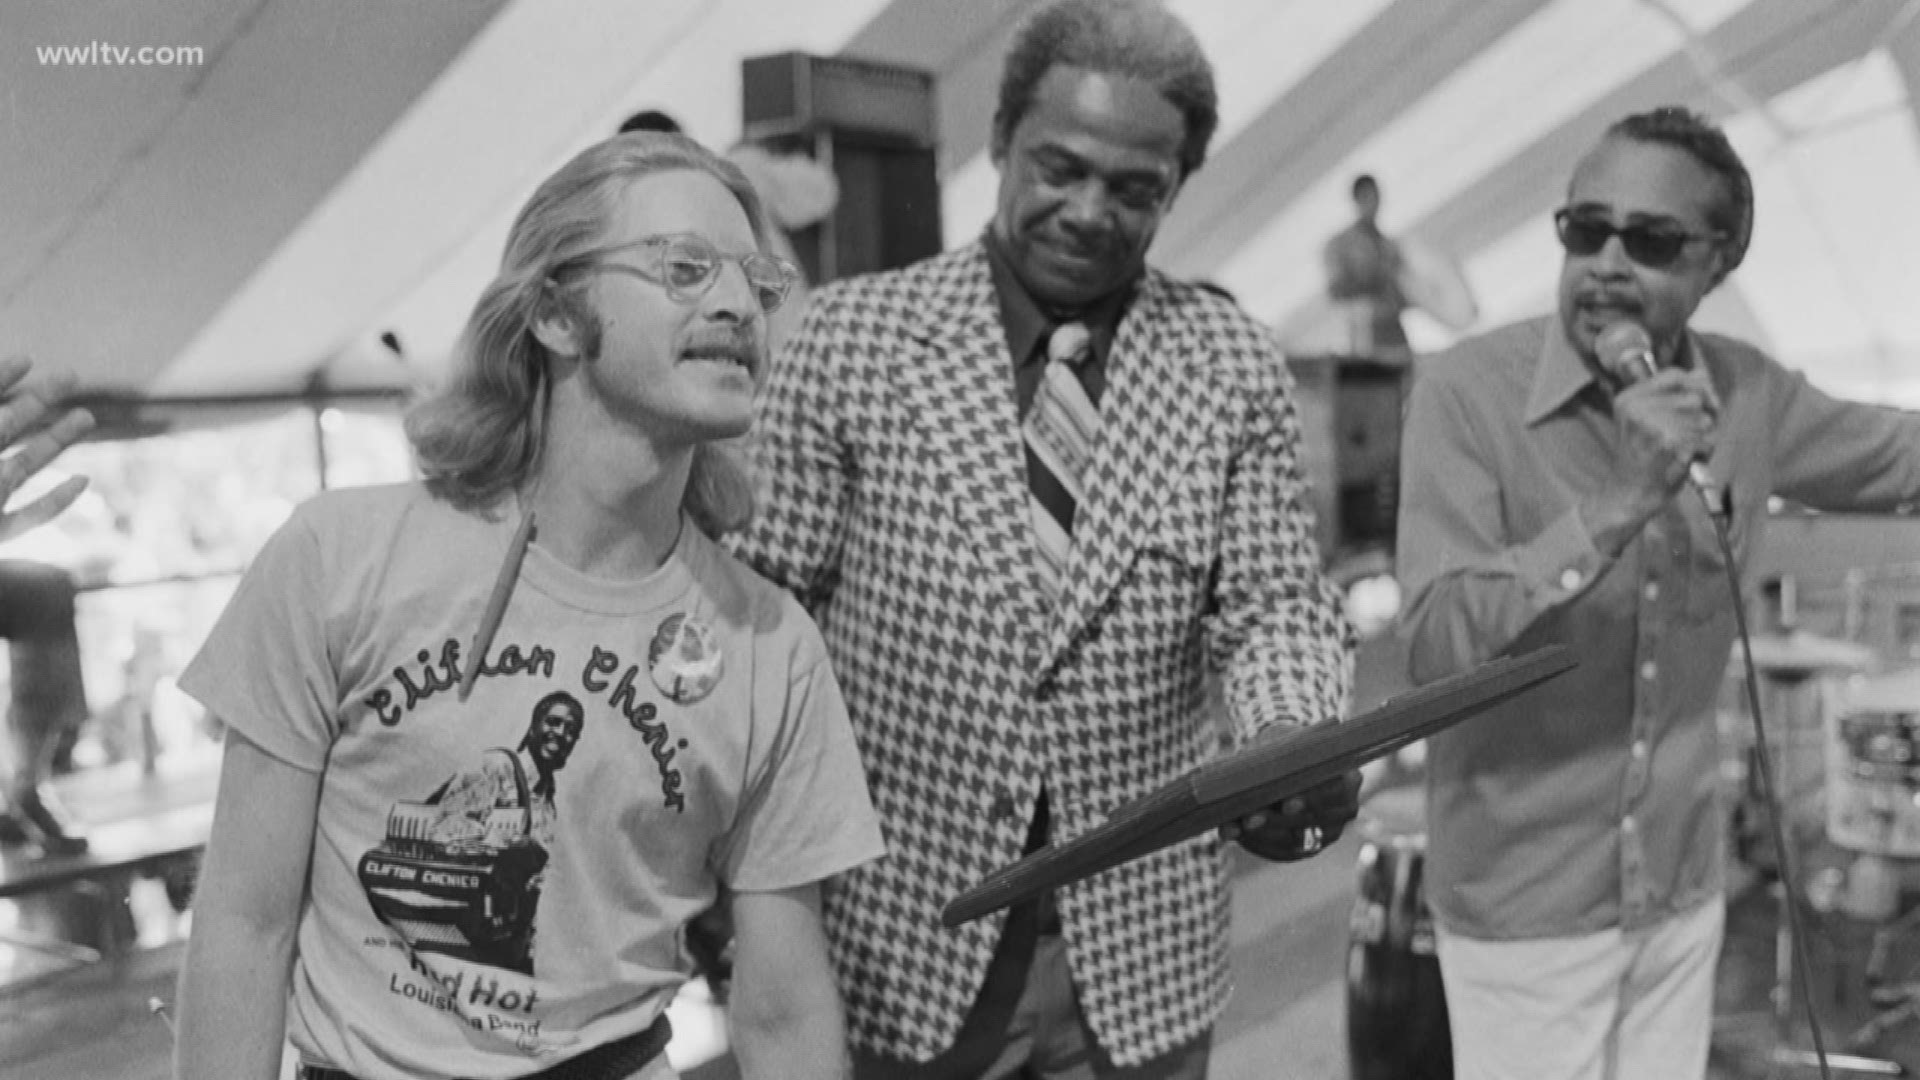 Eric Paulsen sits down with festival producer Quint Davis to talk the history and humble beginnings of the New Orleans Jazz and Heritage Festival, as it celebrates 50 years.